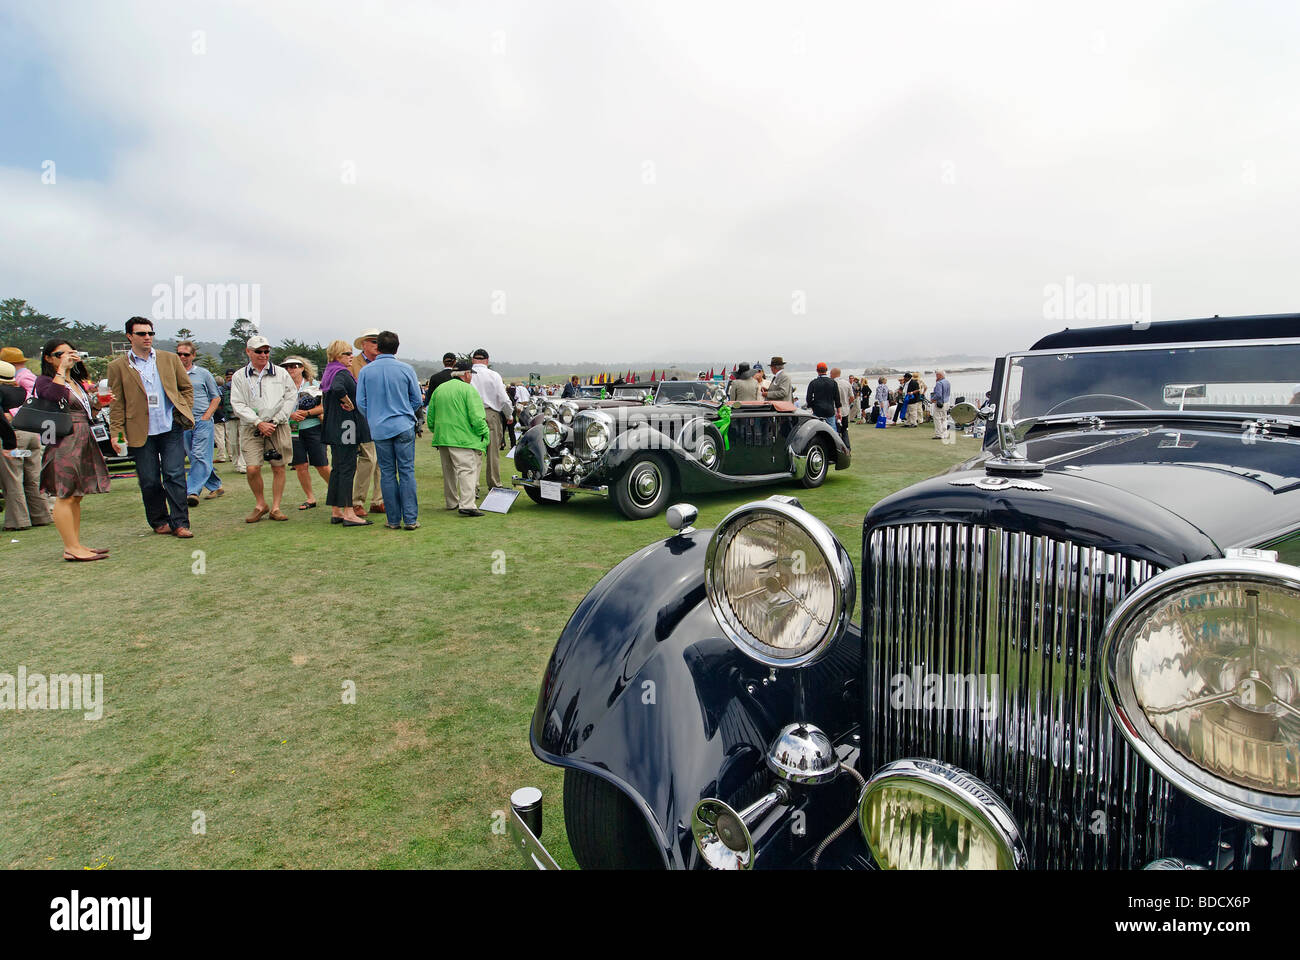 The cars and crowds at the Concours d'Elegance. Stock Photo